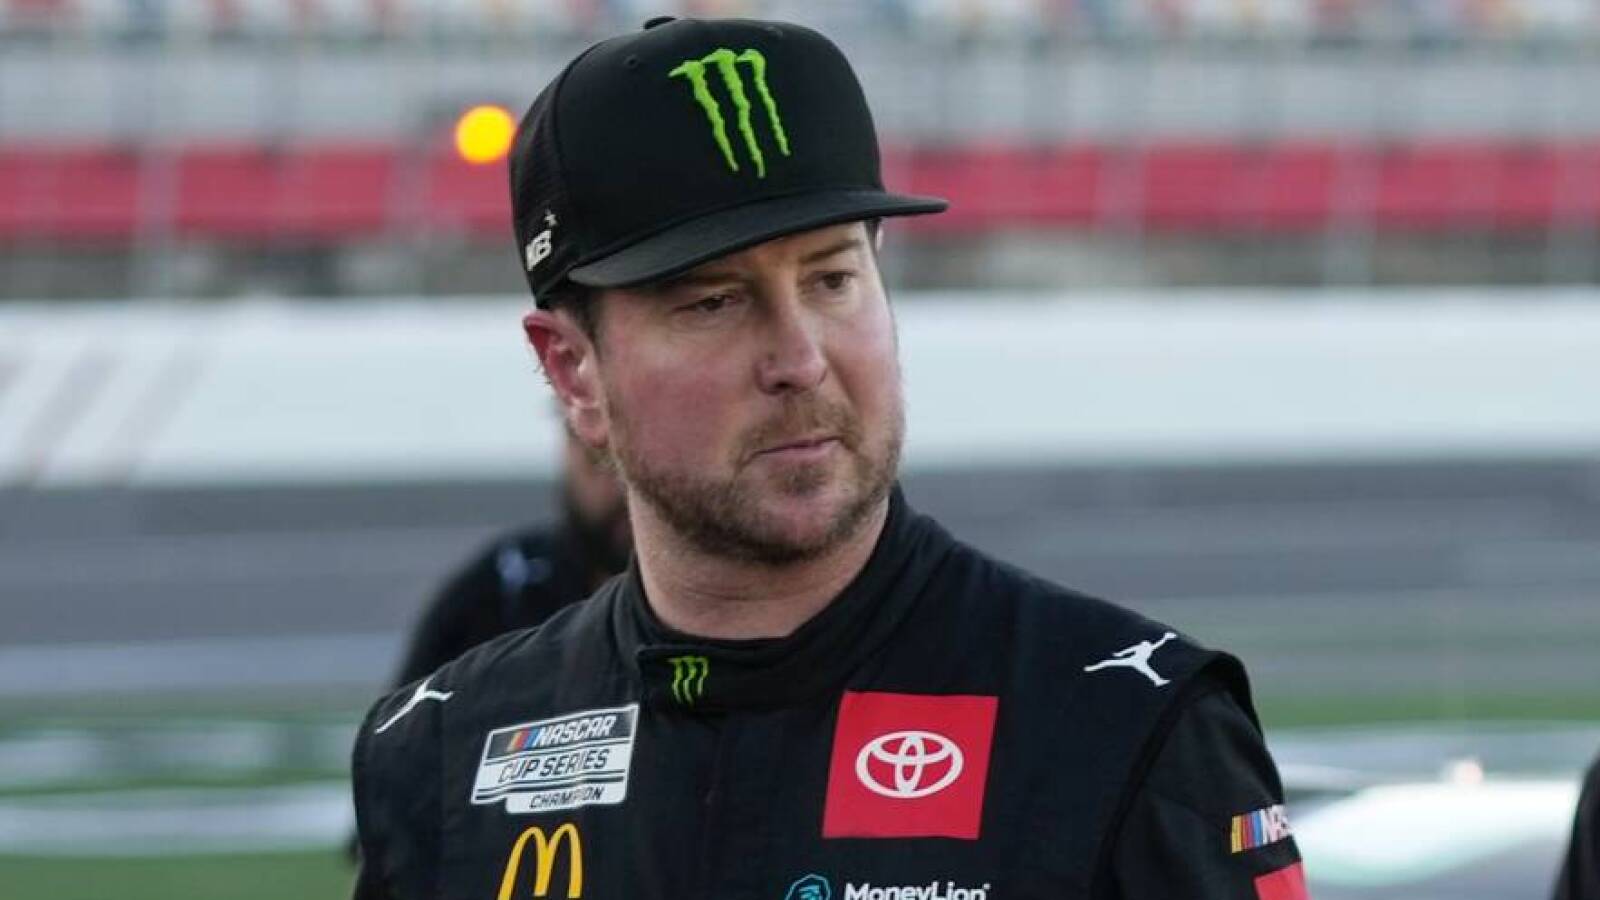 Kurt Busch not cleared by doctors for Pocono race after crash in qualifying